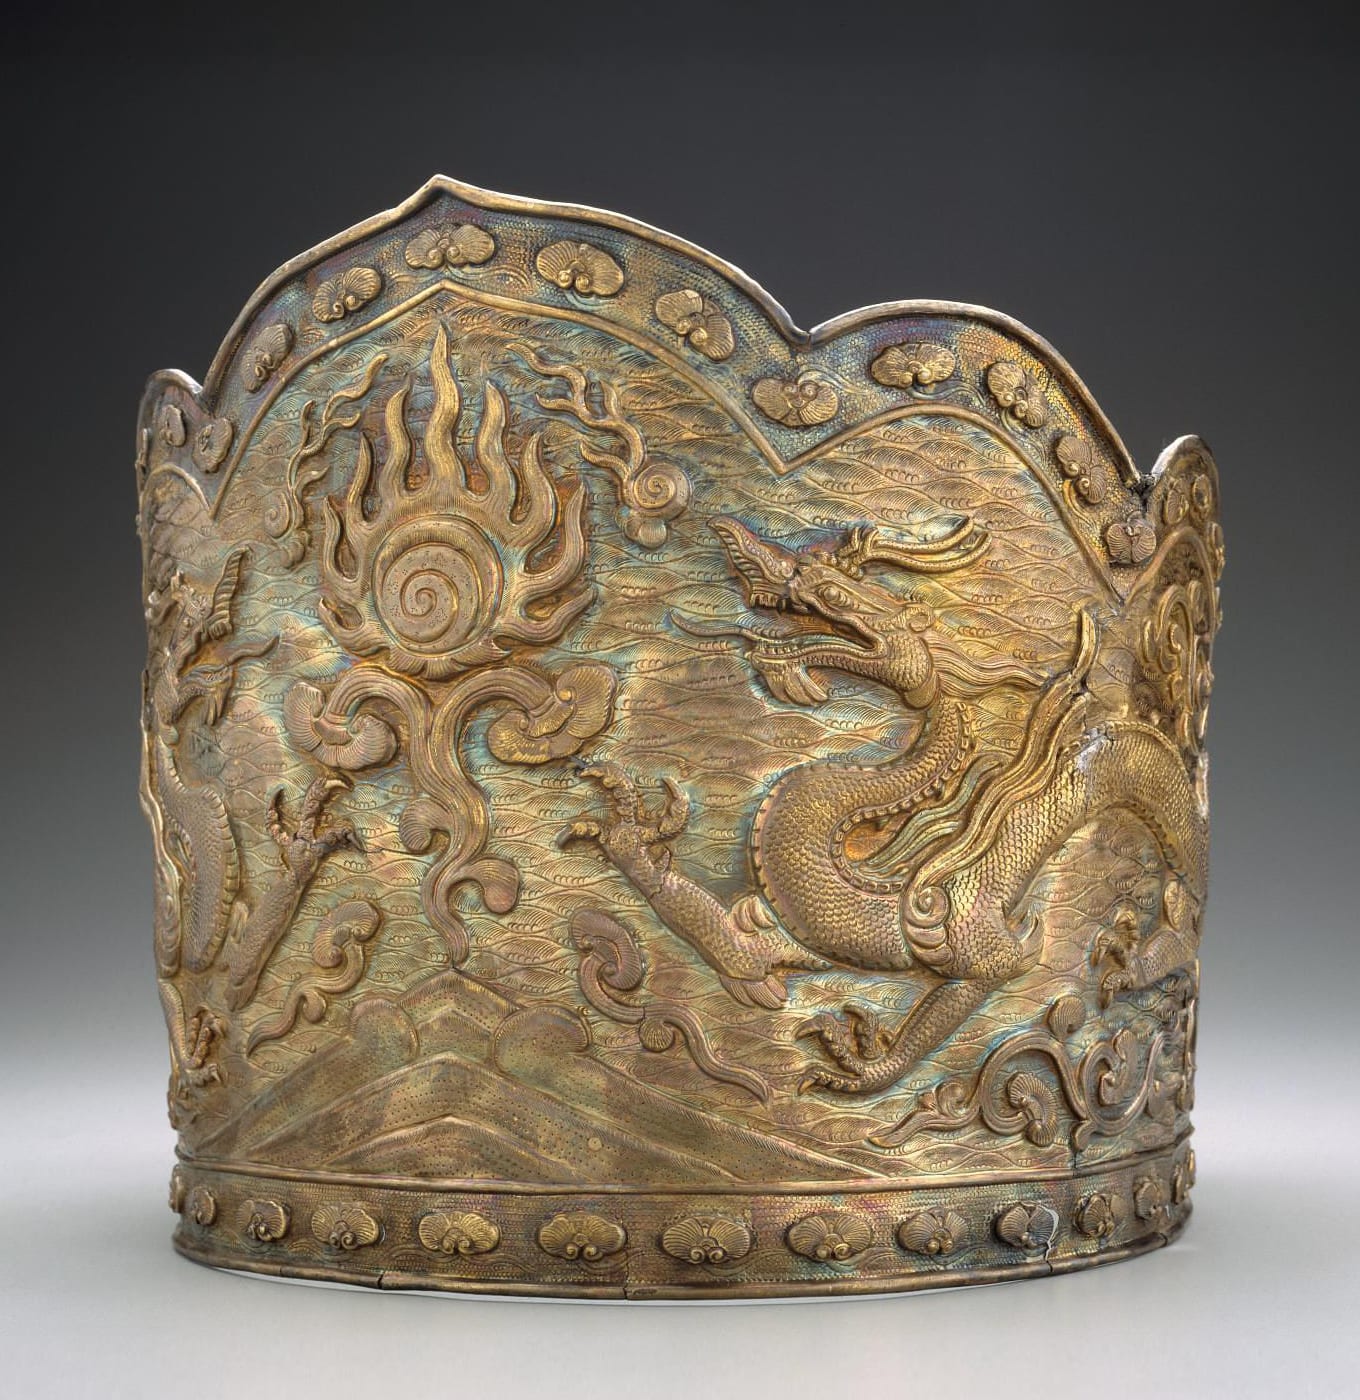 Silver headdress decorated with two dragons and a flaming jewel. China, Liao dynasty, 10th-11th century